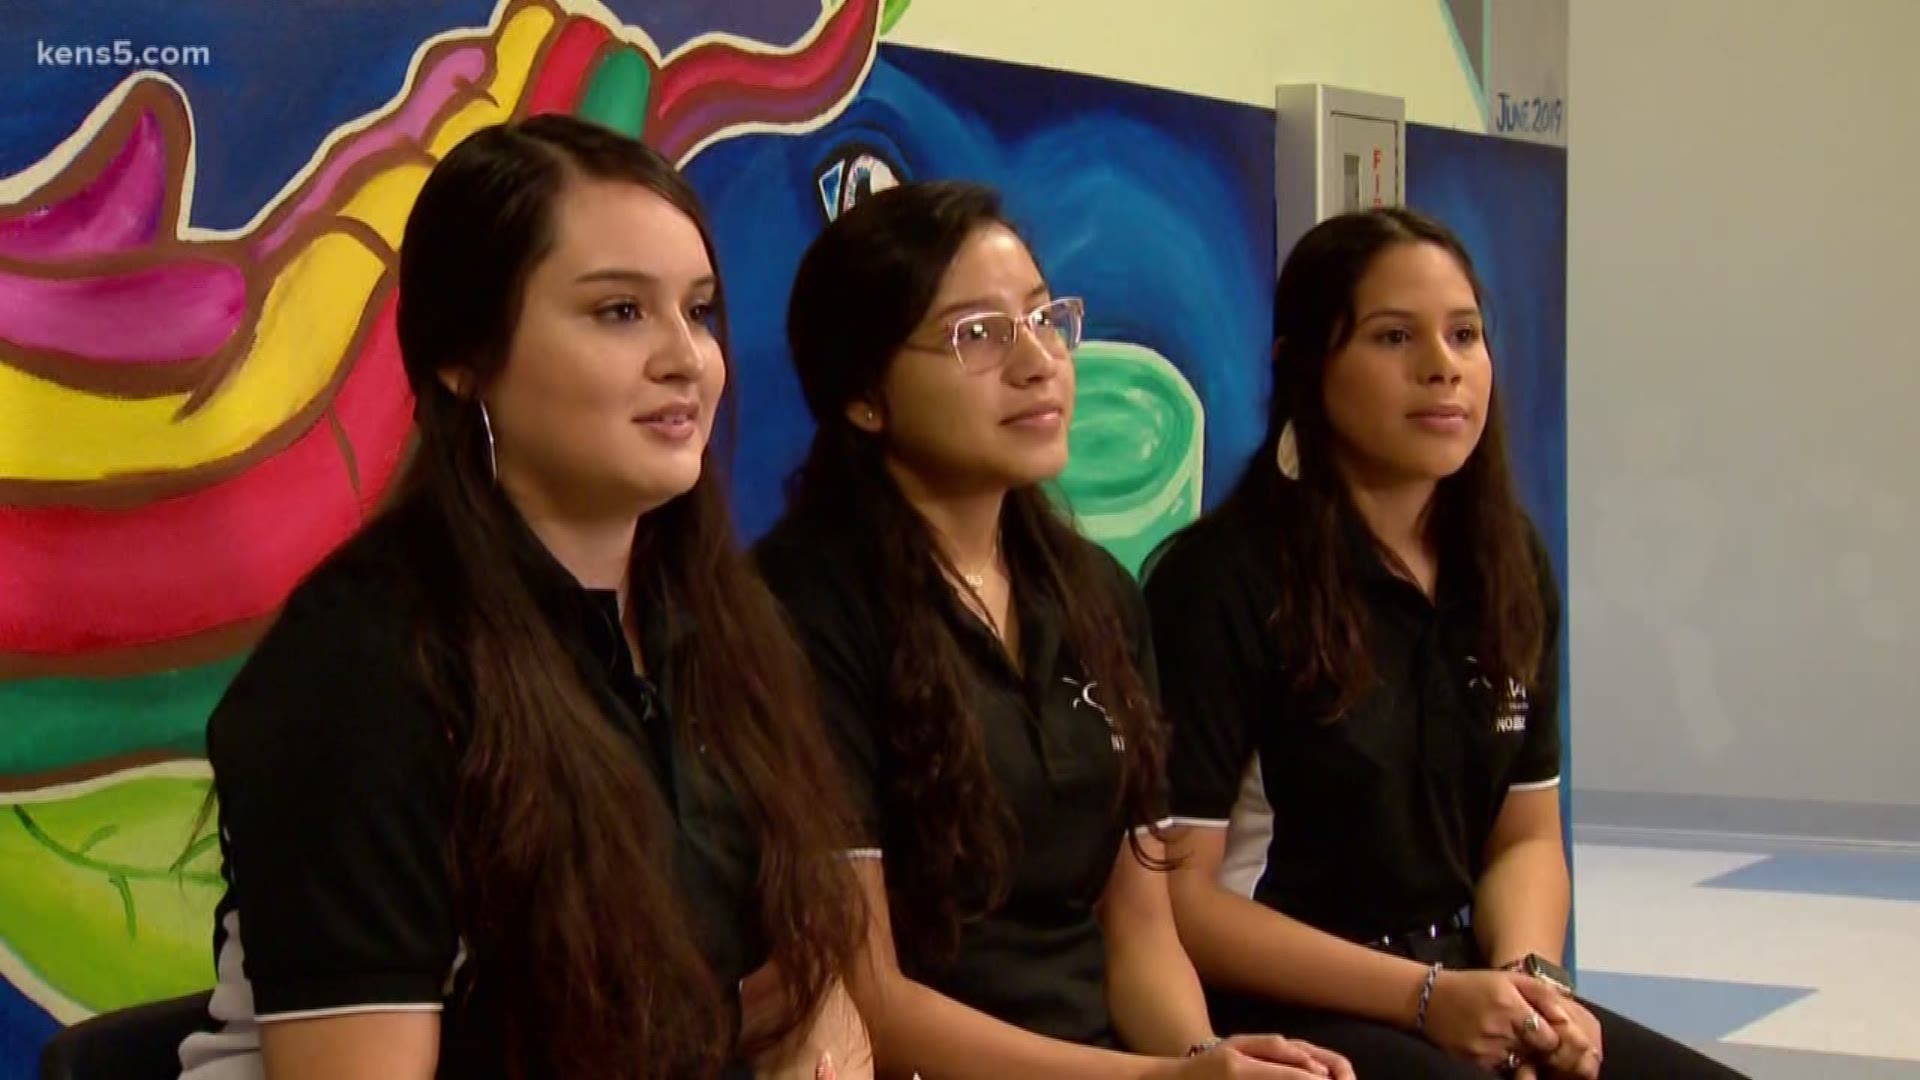 Marvin Hurst introduces you to the young ladies behind the "Mexican American Society" in Kids Who Make San Antonio Great.